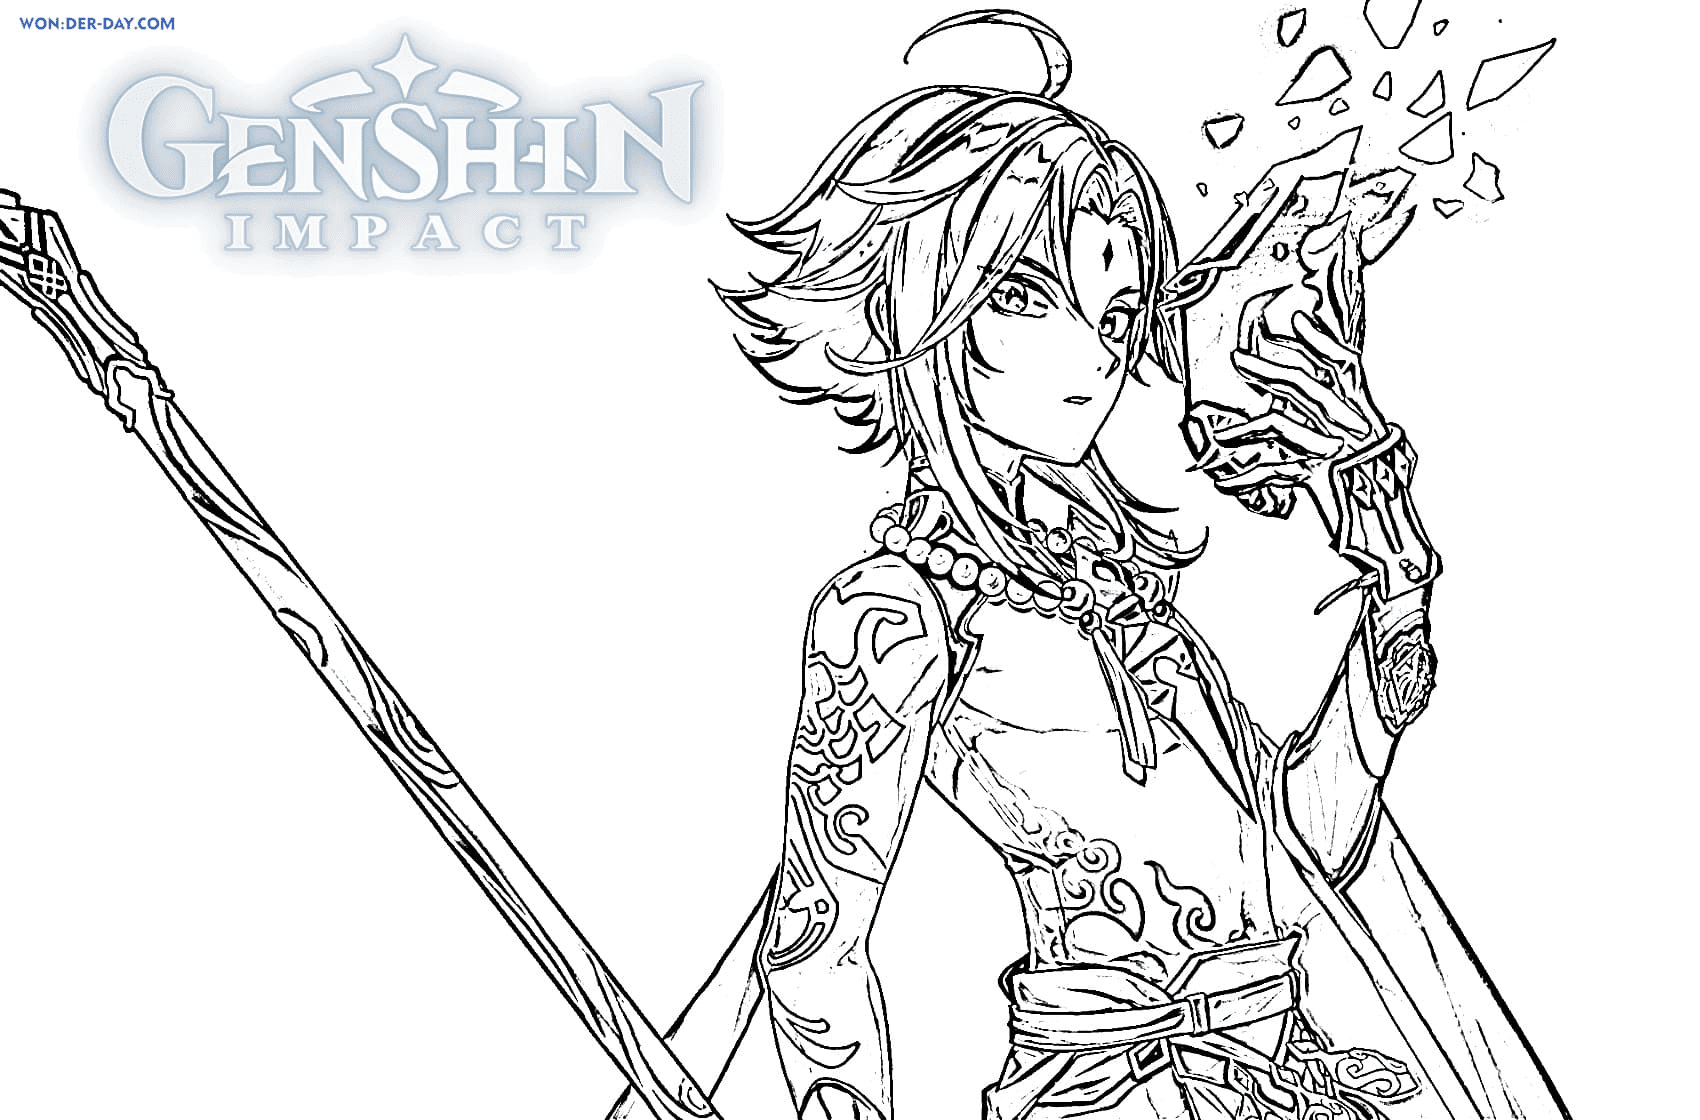 Xiao Coloring Page